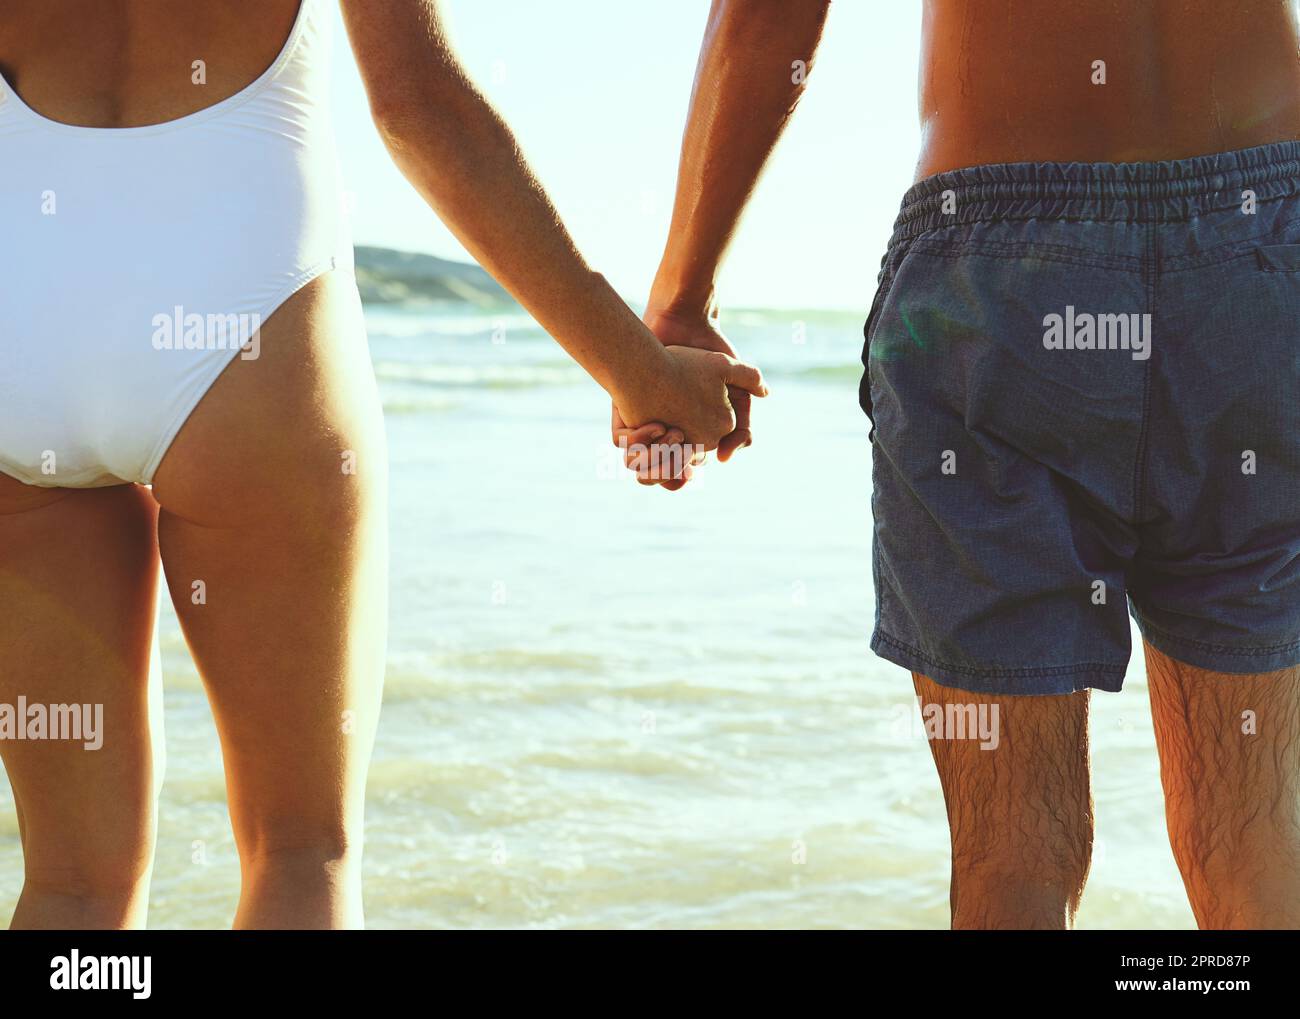 True love is staying by each others side. Closeup shot of a couple holding hands at the beach. Stock Photo